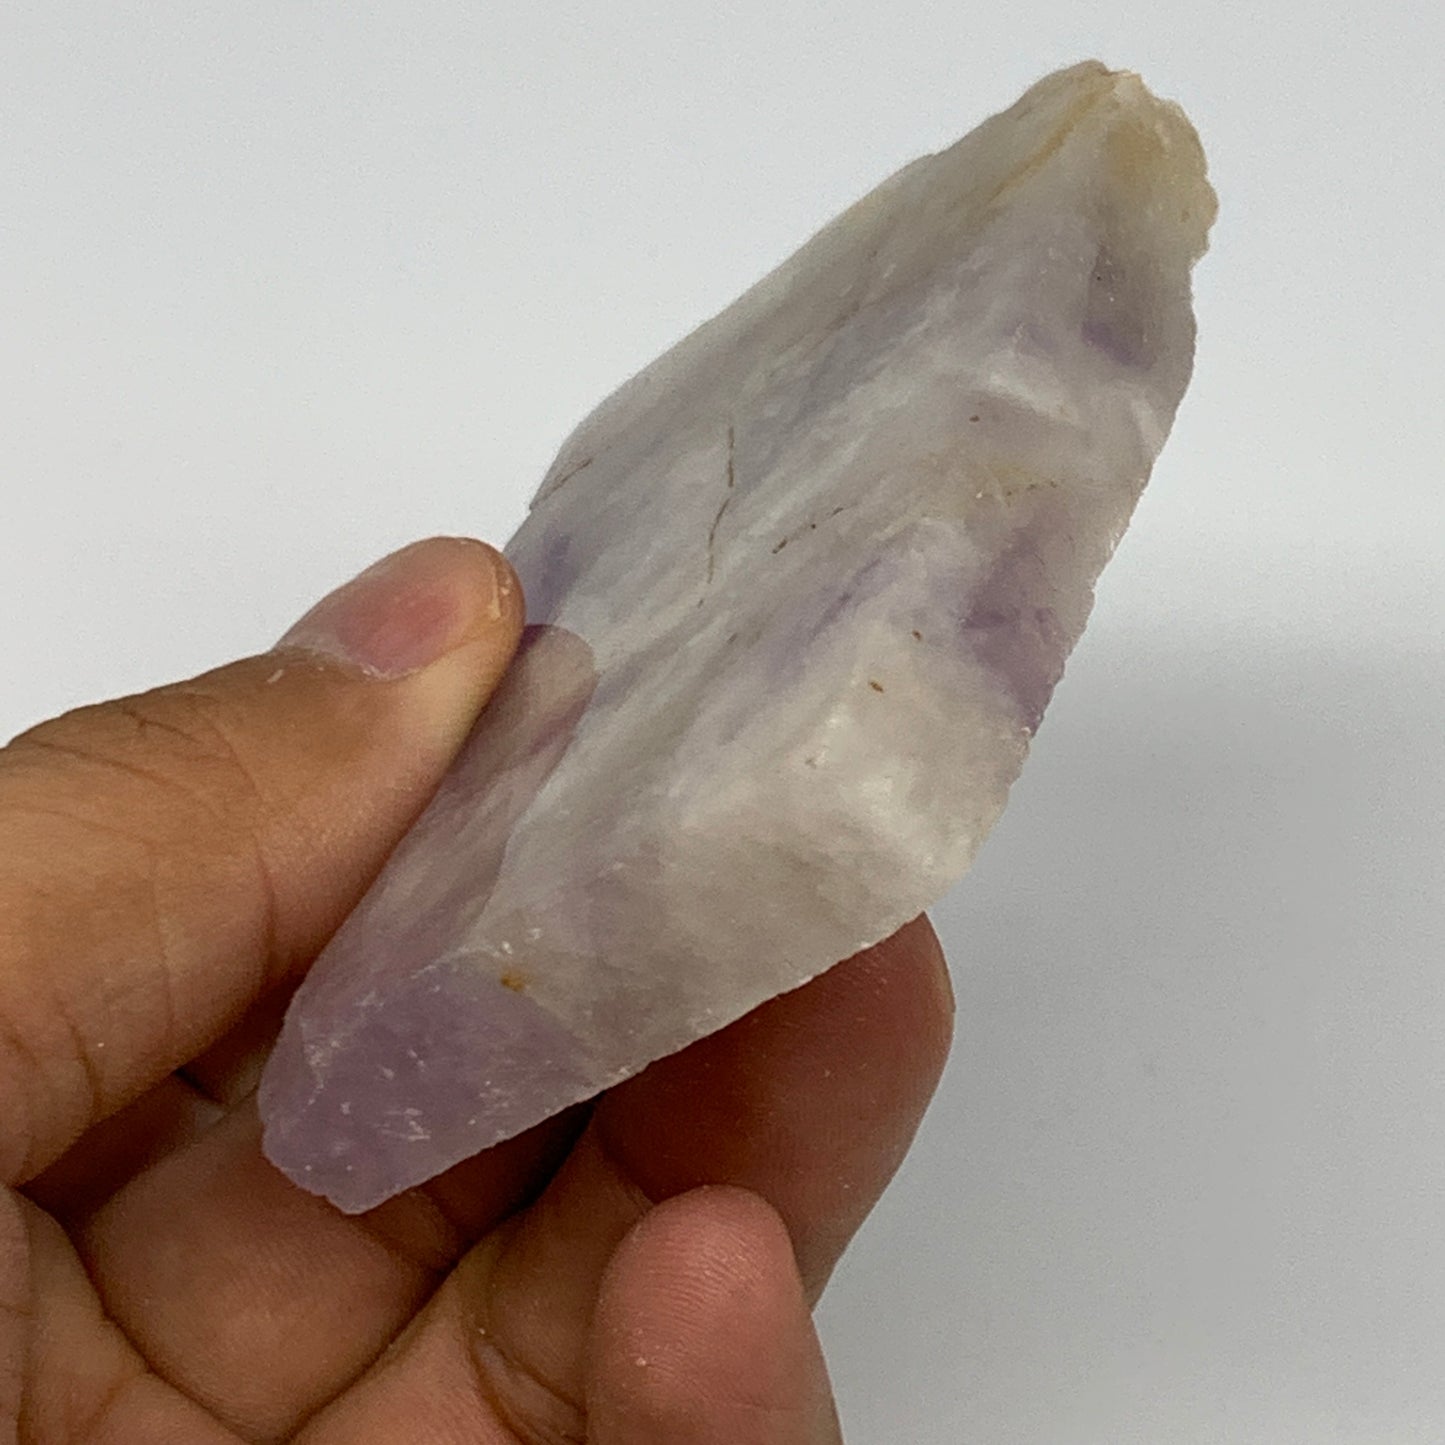 97.7g, 3.1"x2.2"x0.5", One face polished Banned Amethyst, One face semi polished